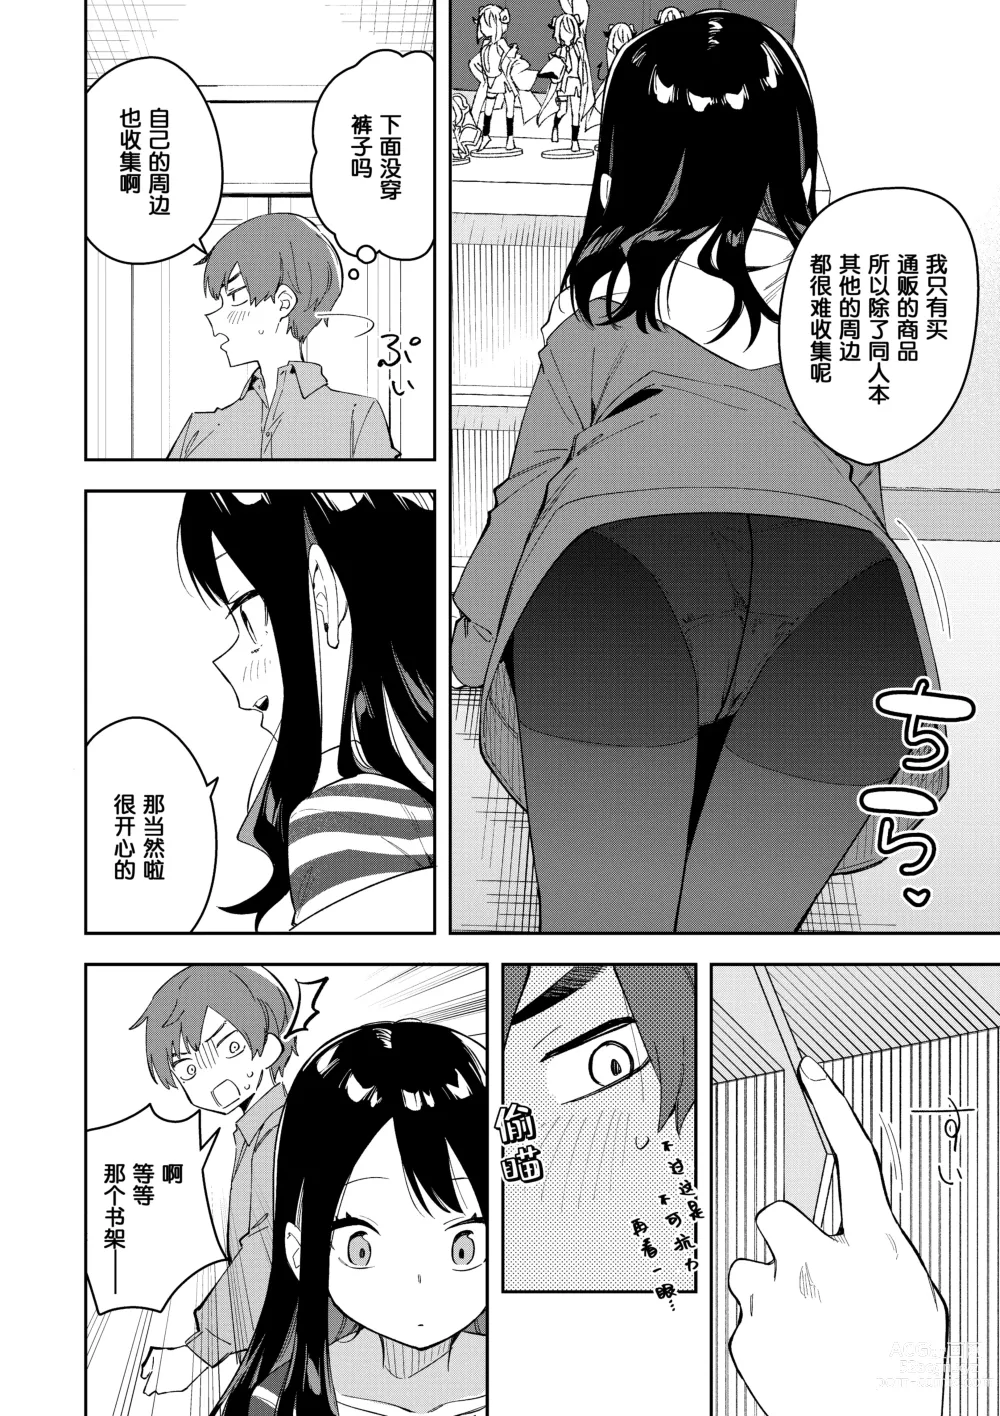 Page 12 of doujinshi 隣人は有名配信者3人目